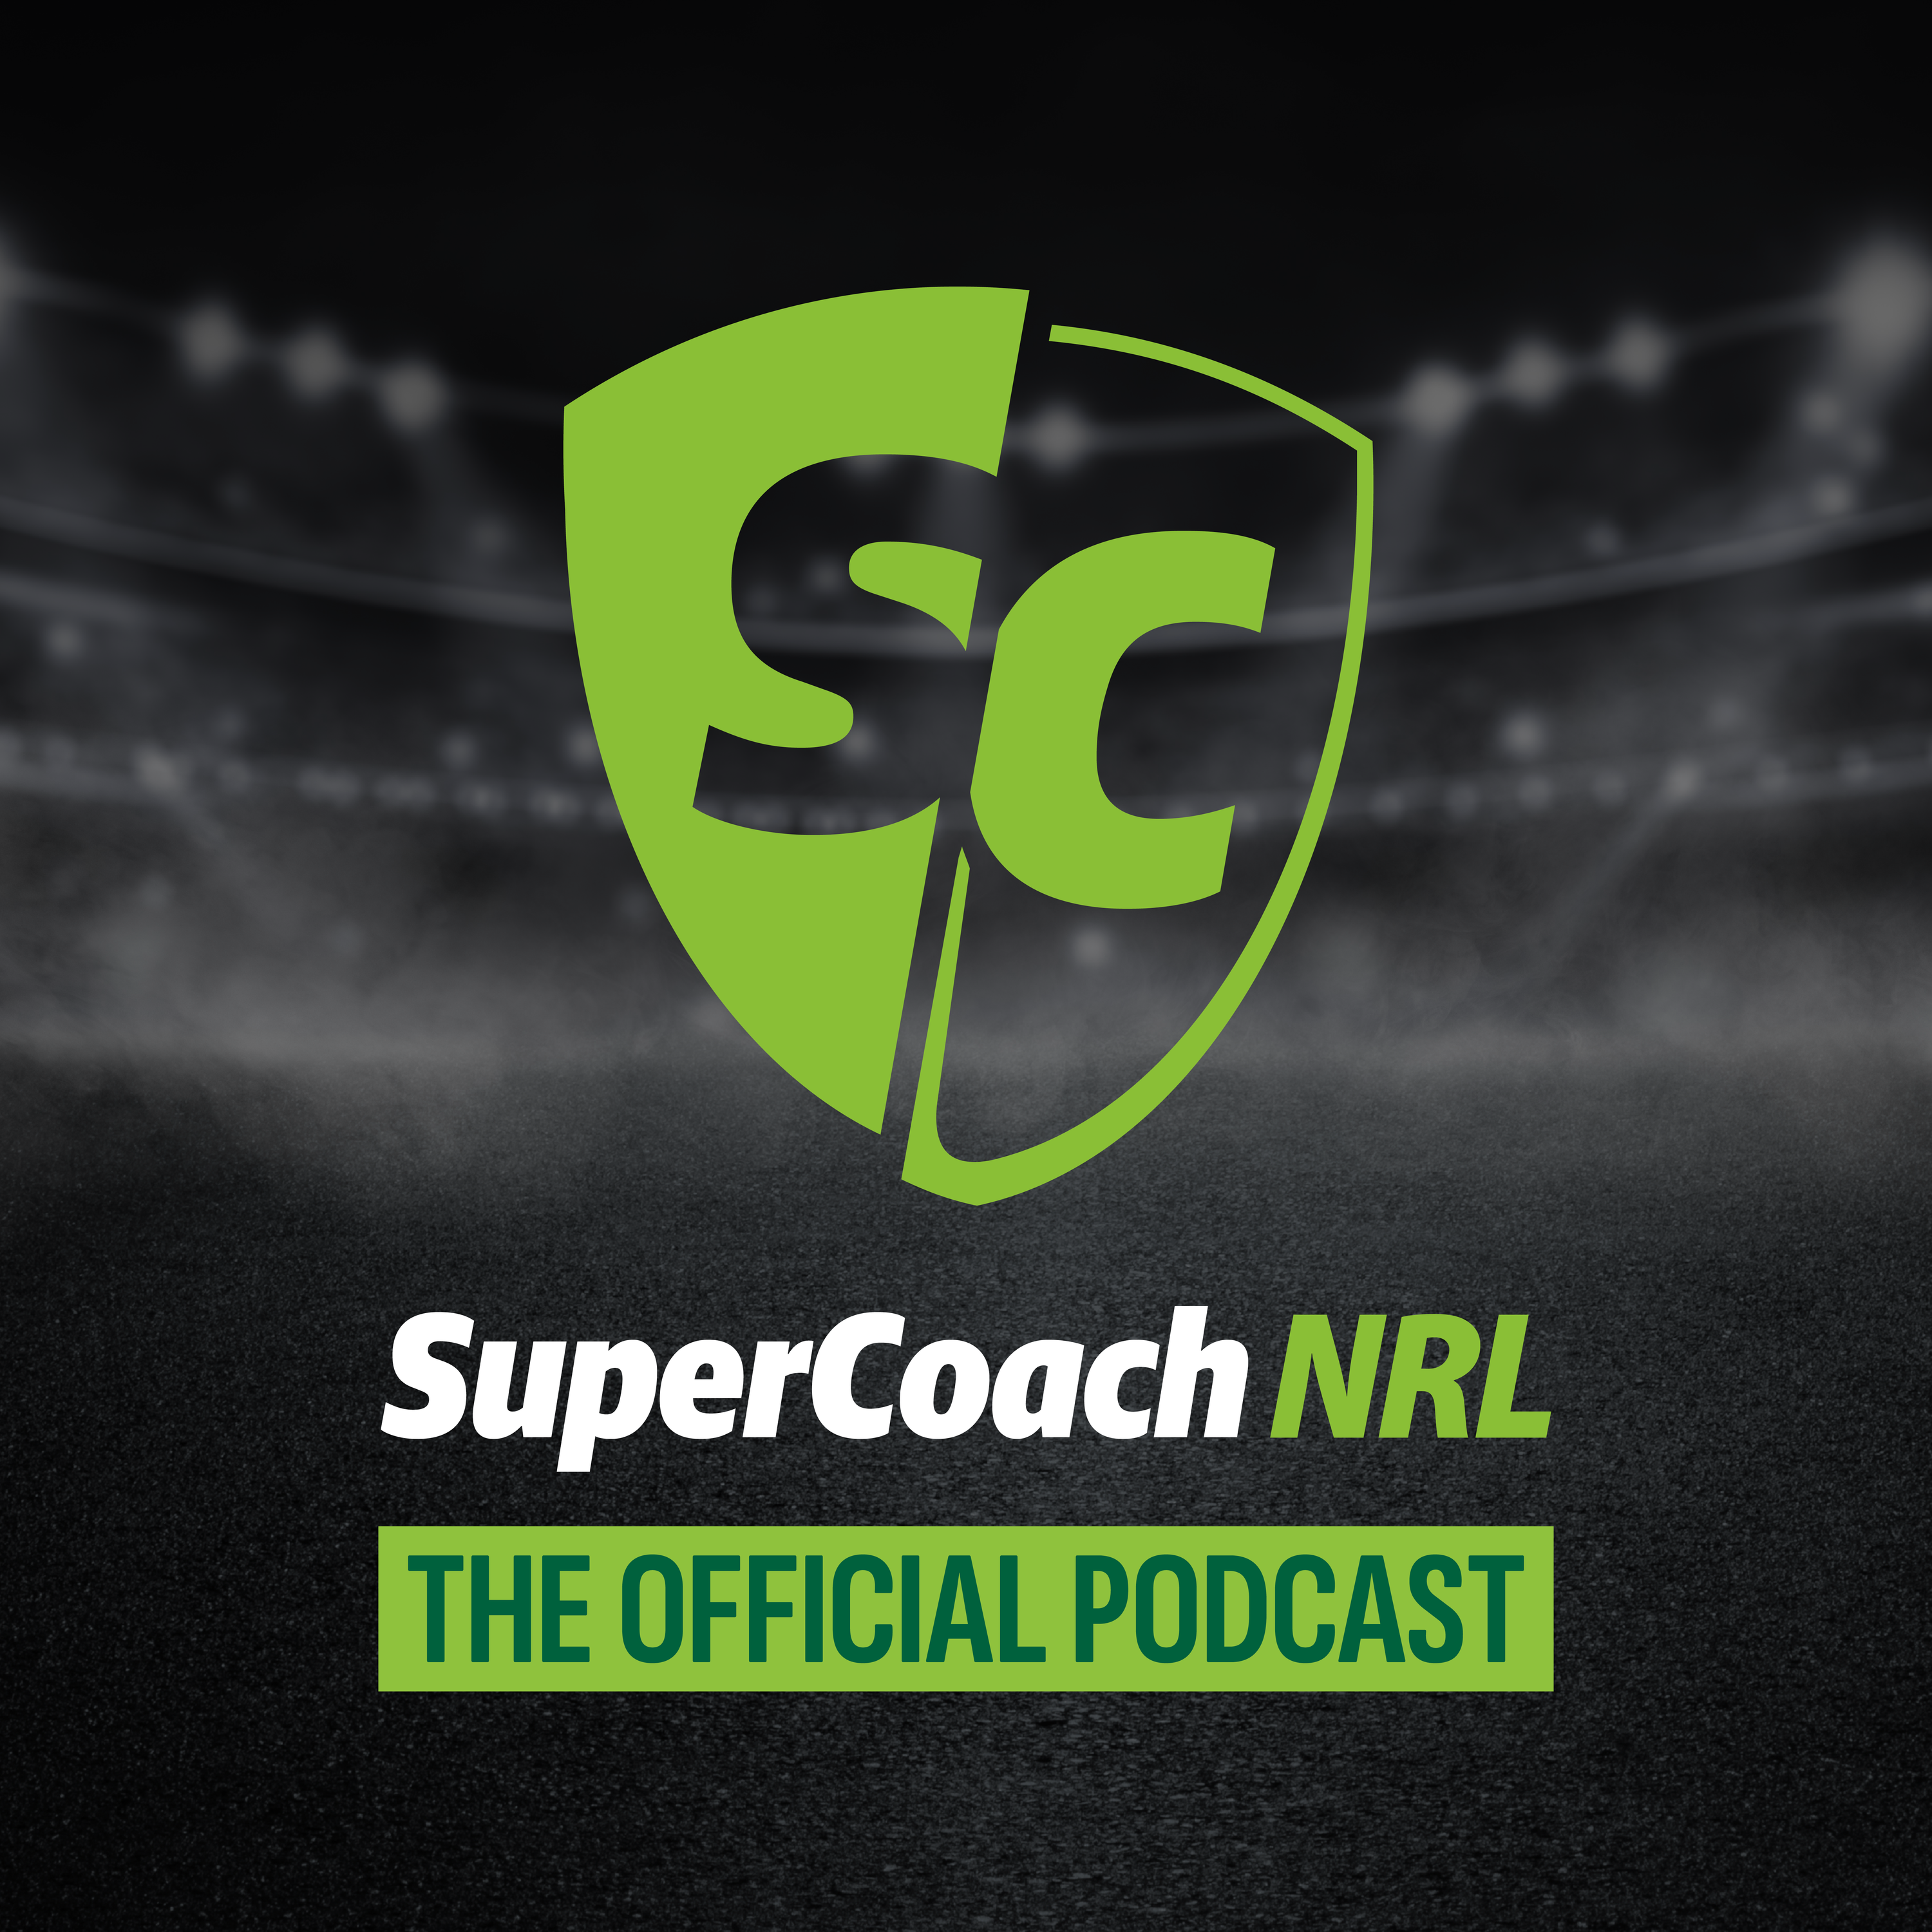 NRL SuperCoach podcast: Round 4 preview